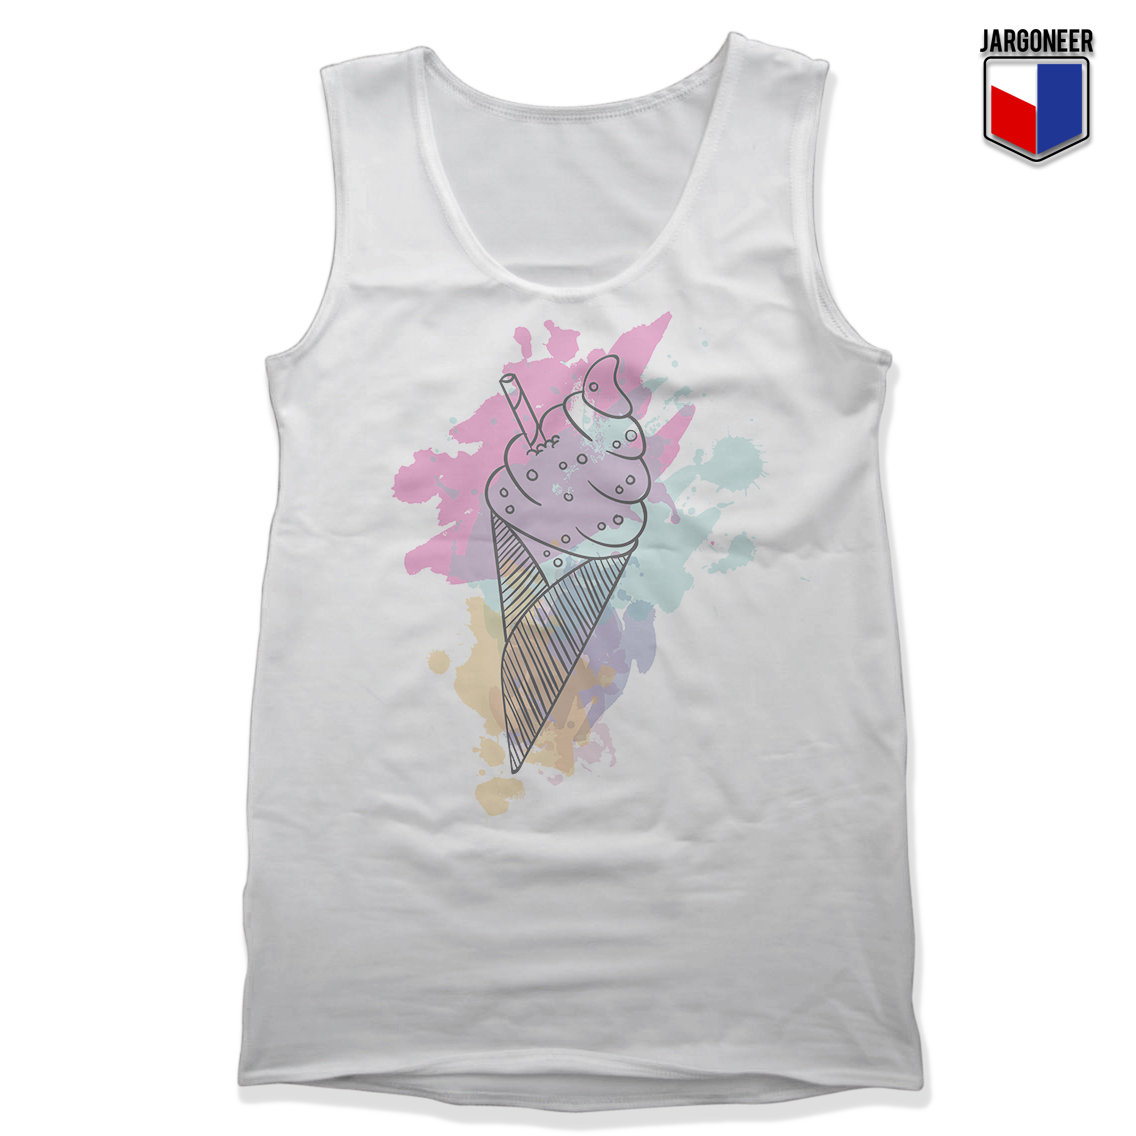 Water Color Ice Cream Unisex Adult Tank Top - S,M,L,XL,2XL,3XL ...